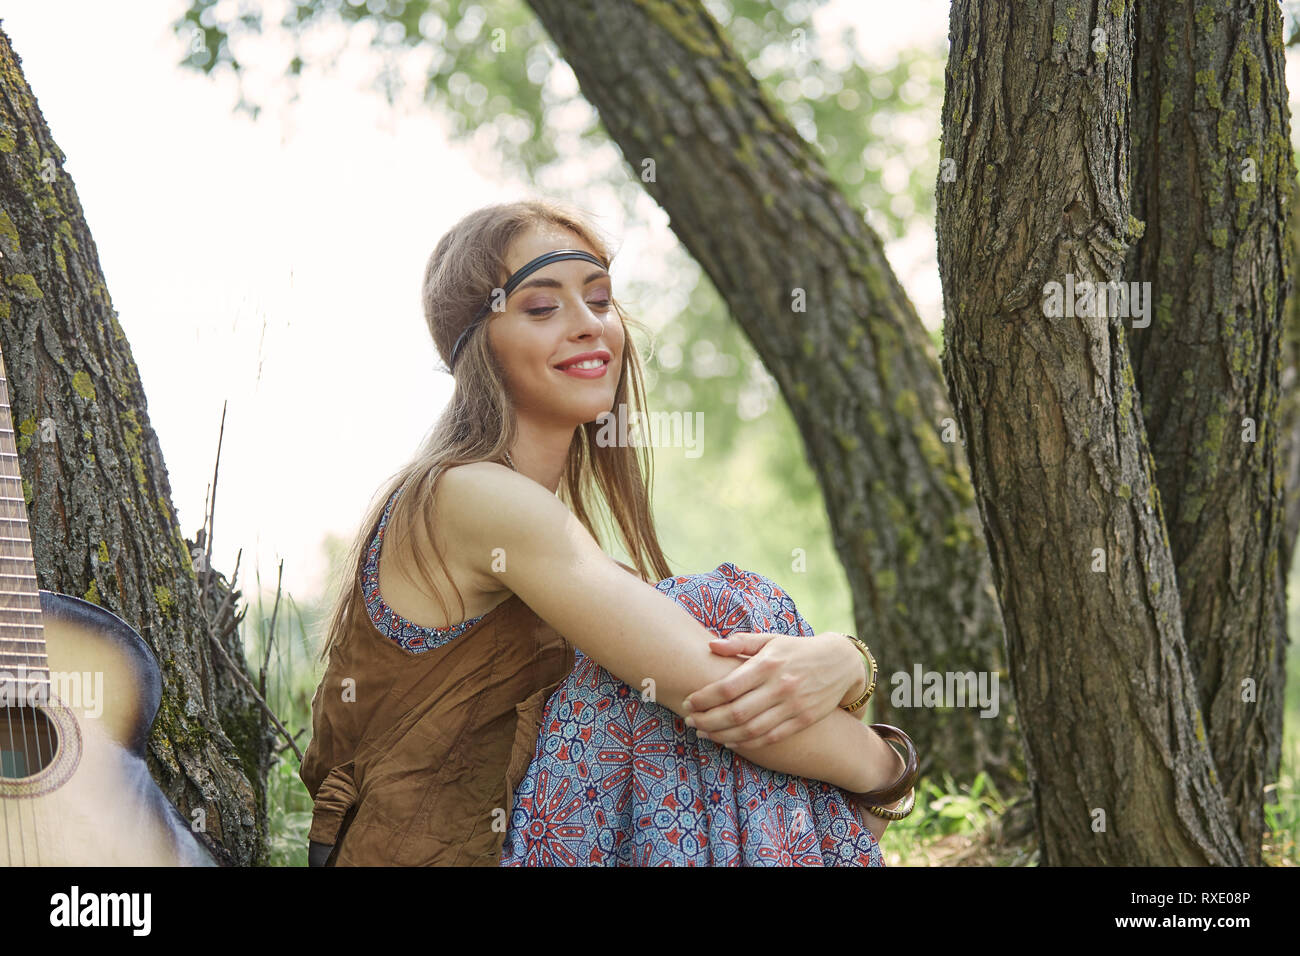 beautiful hippie girl sitting near trees in forest Stock Photo